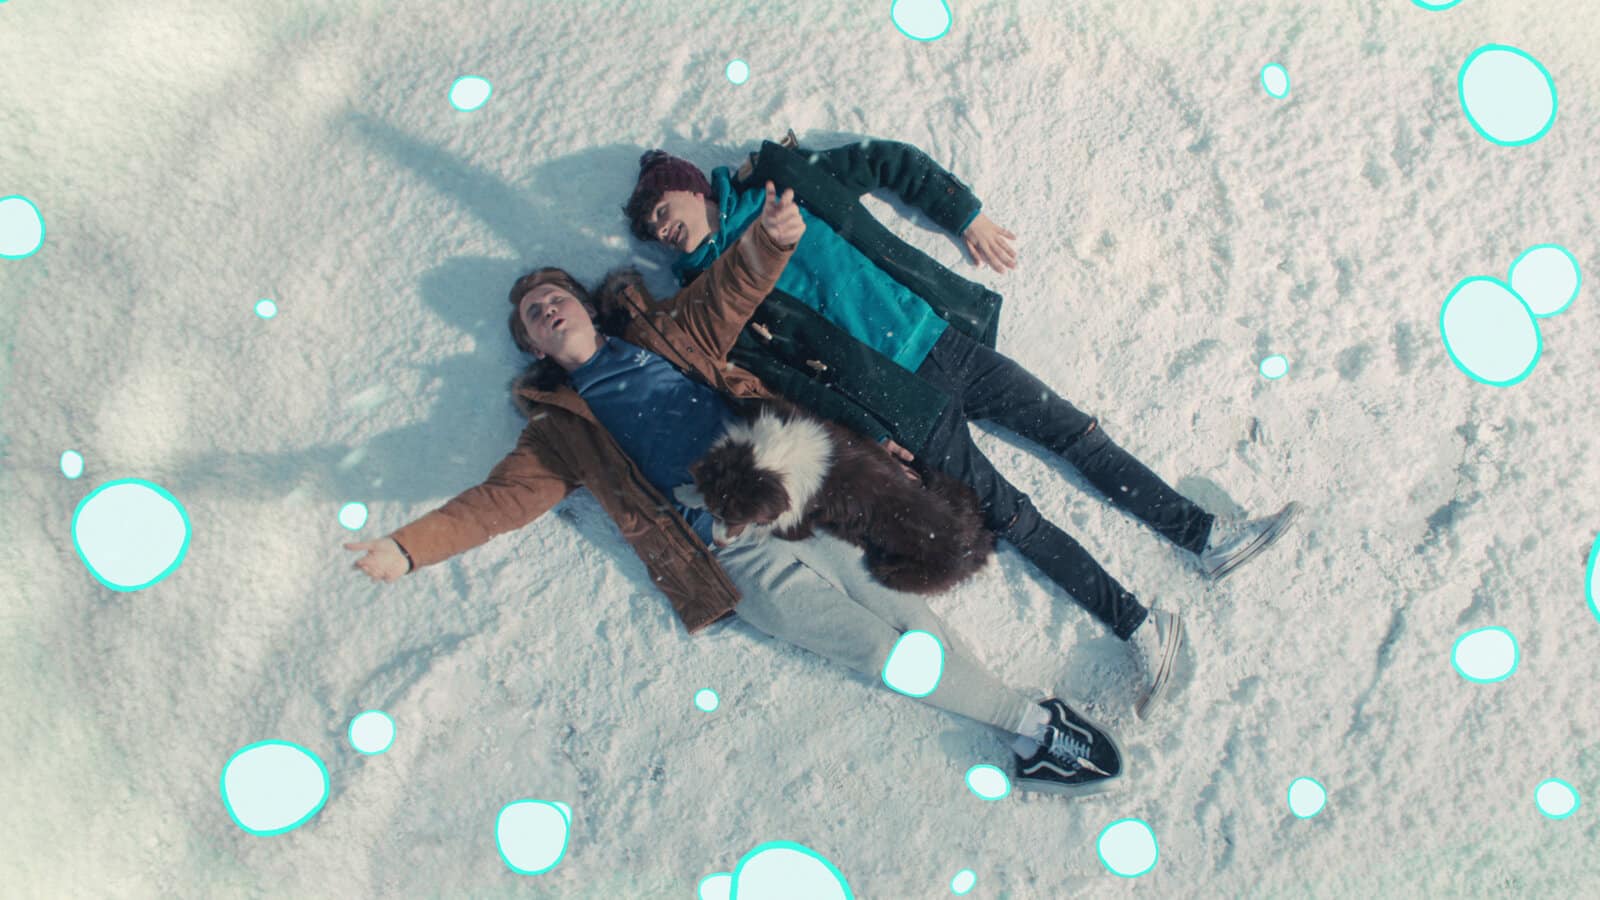 Charlie and Nick lie in the snow on Heartstopper